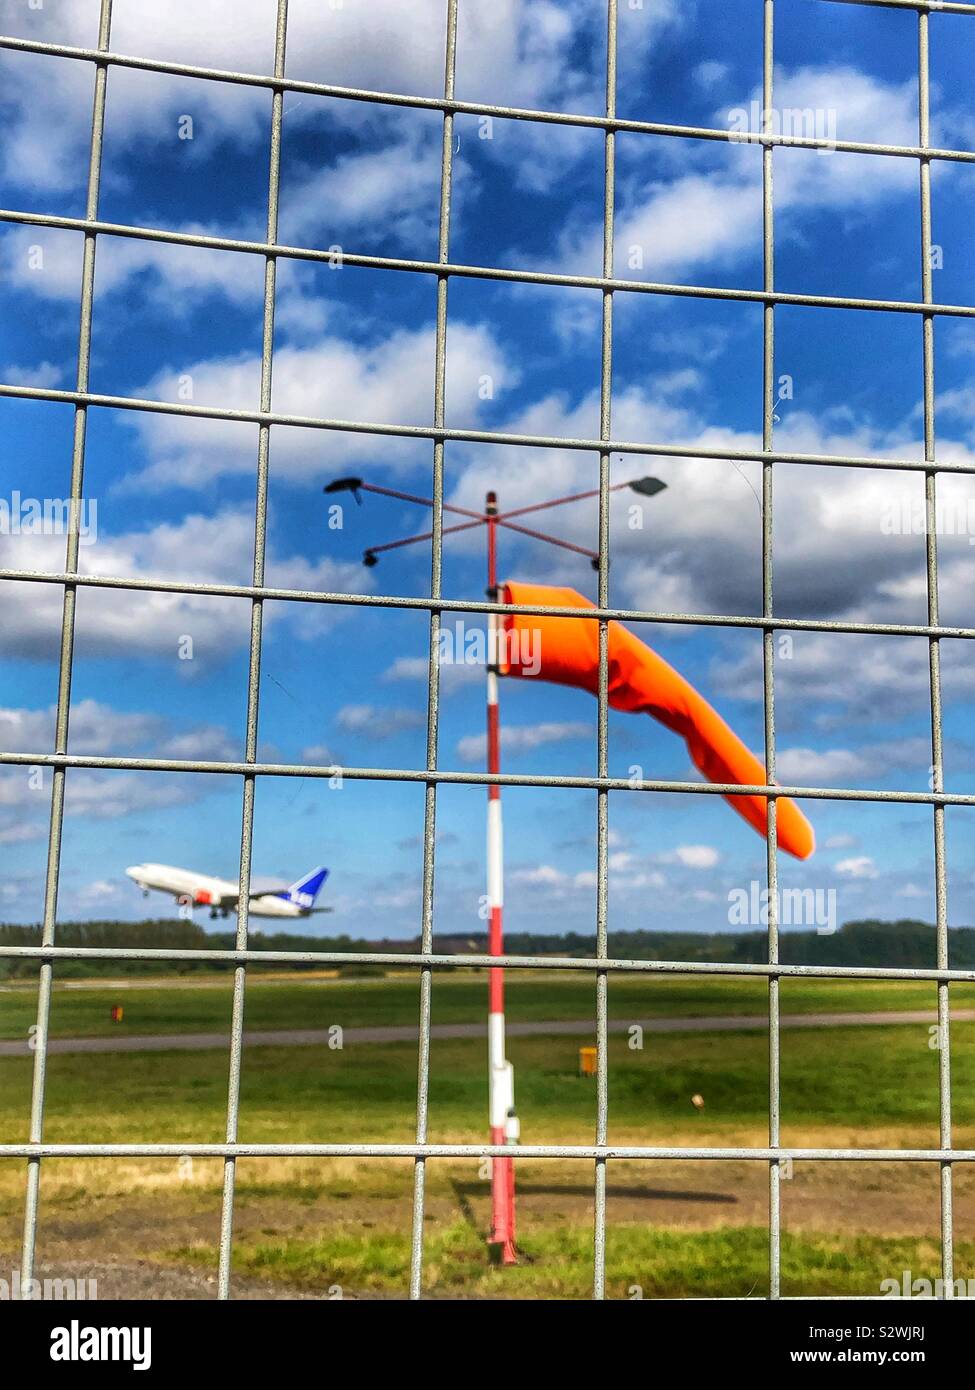 Airport perimeter fence with windsock and aeroplane taking off from runway Stock Photo